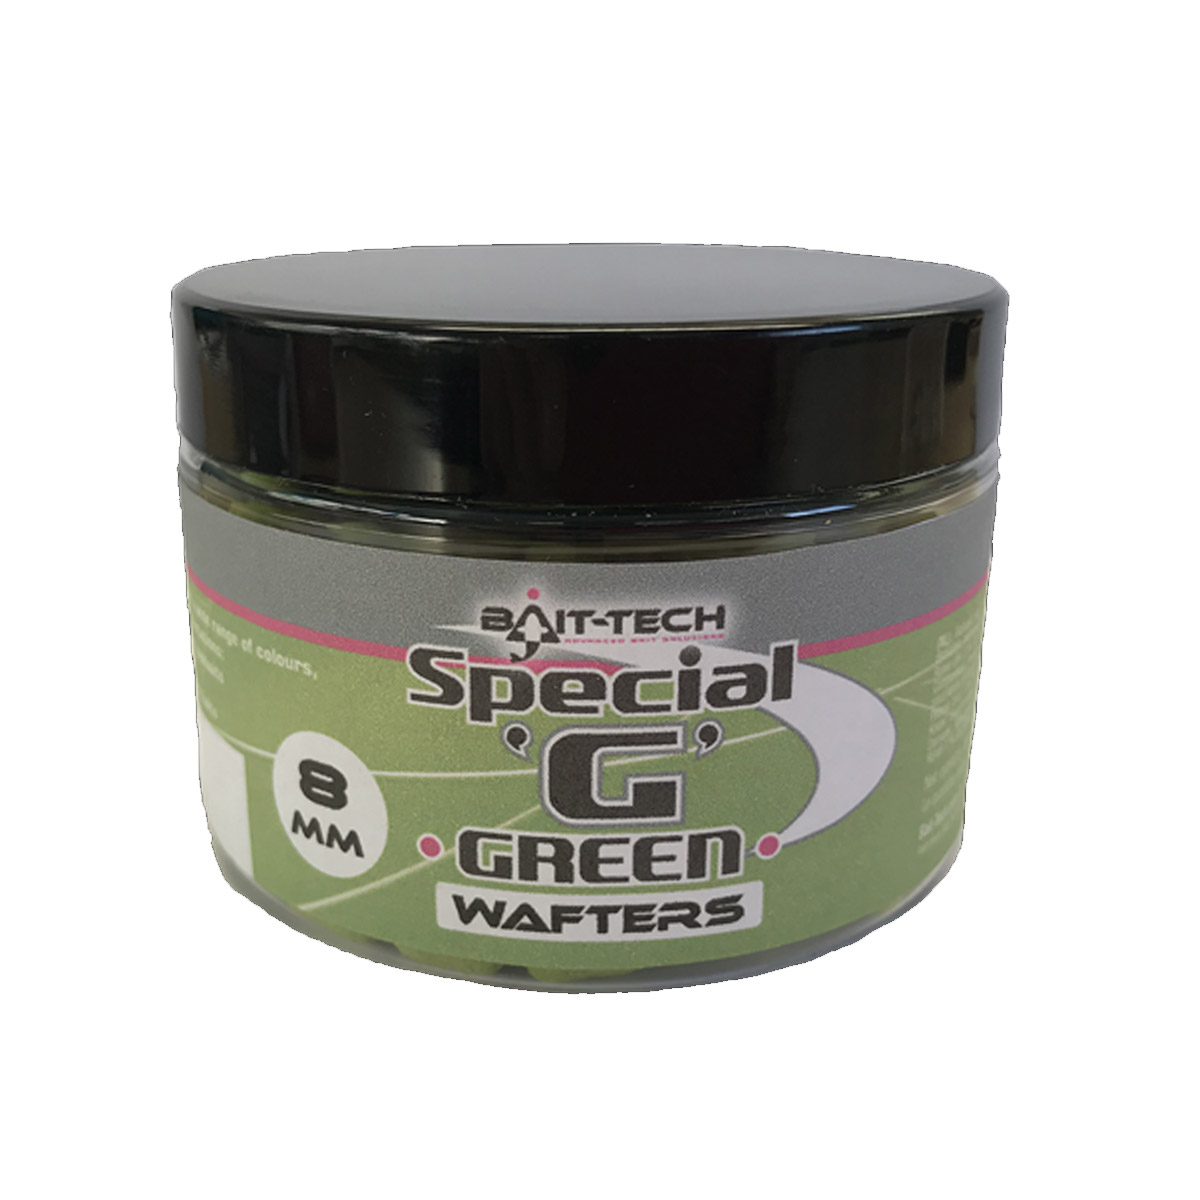 Bait-Tech Wafters Special G Green Dumbells 8 MM